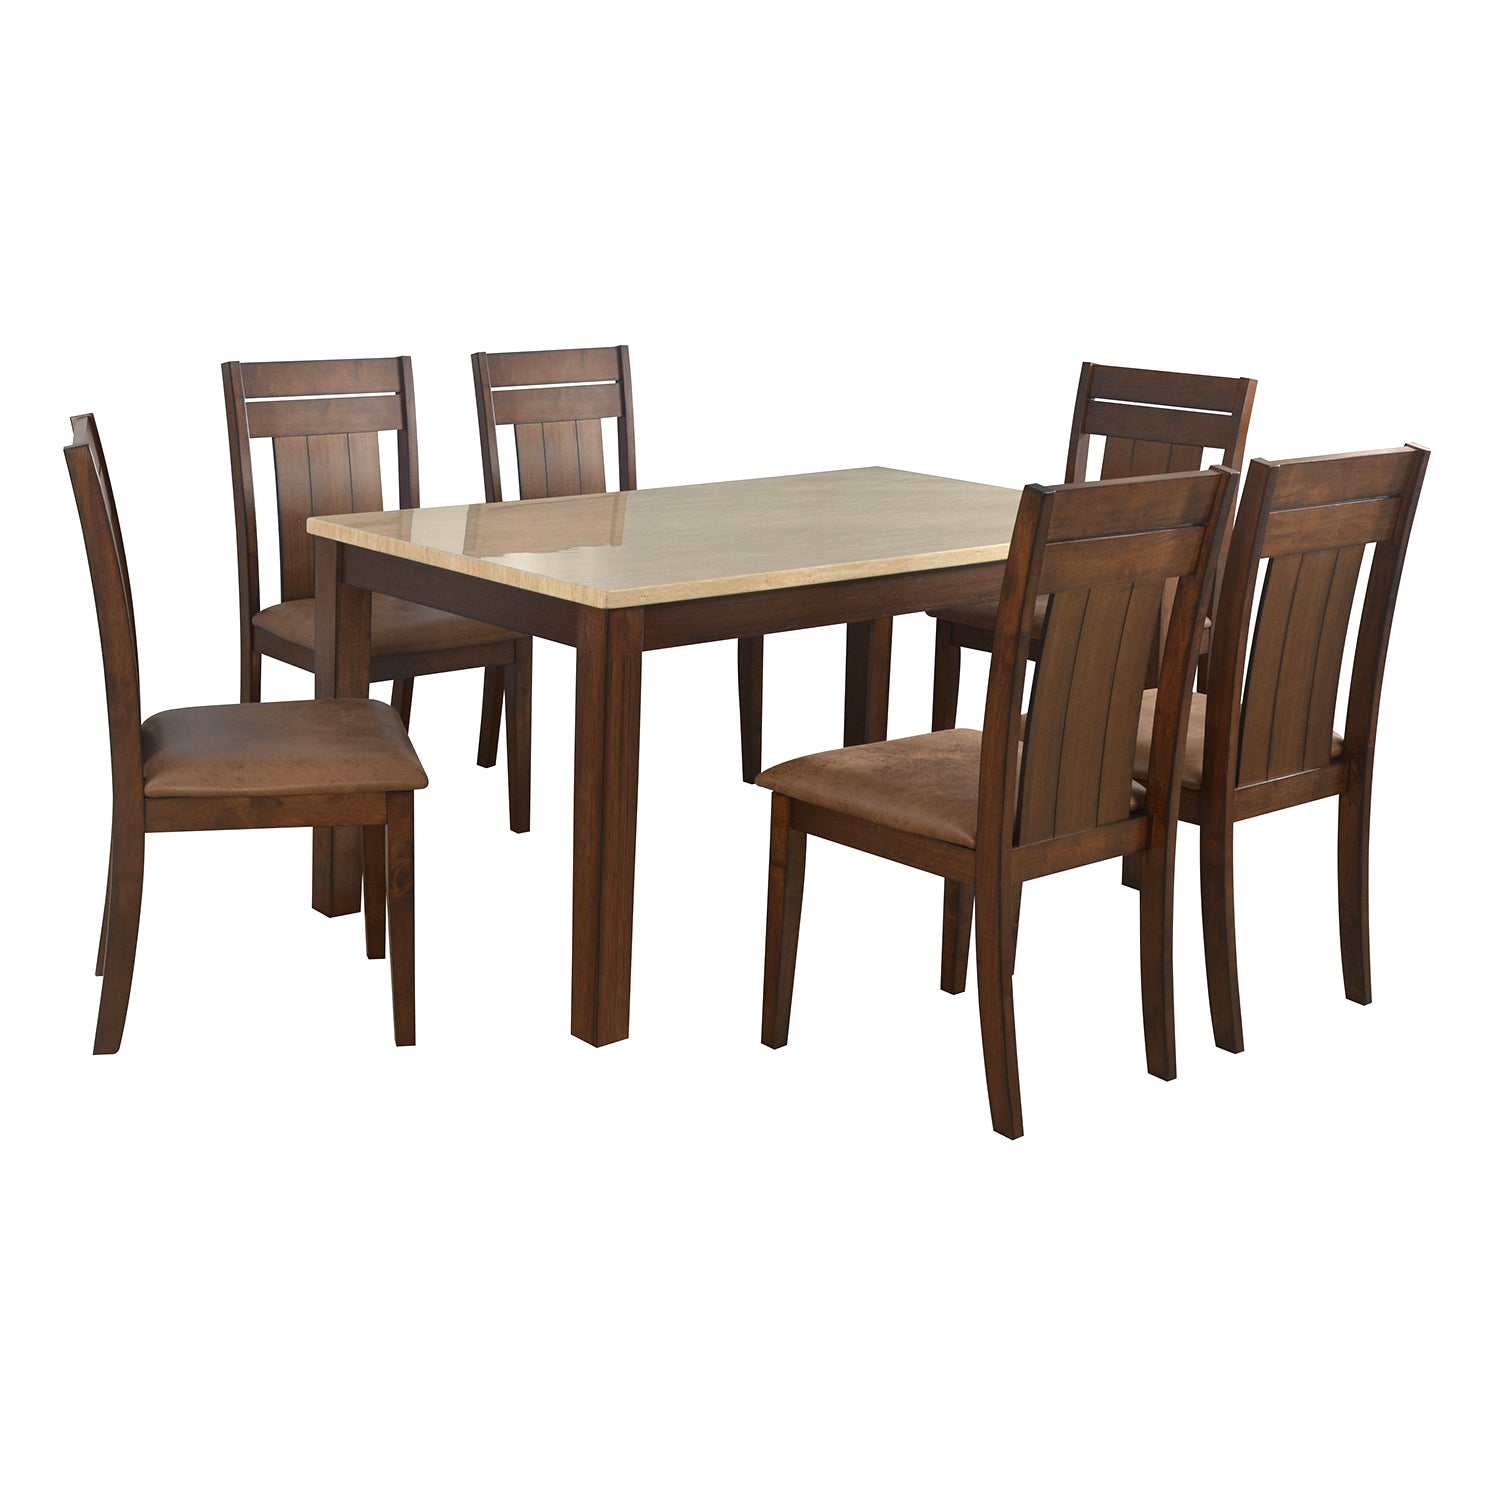 Arnold Marble 6 Seater Dining Set (Beige)